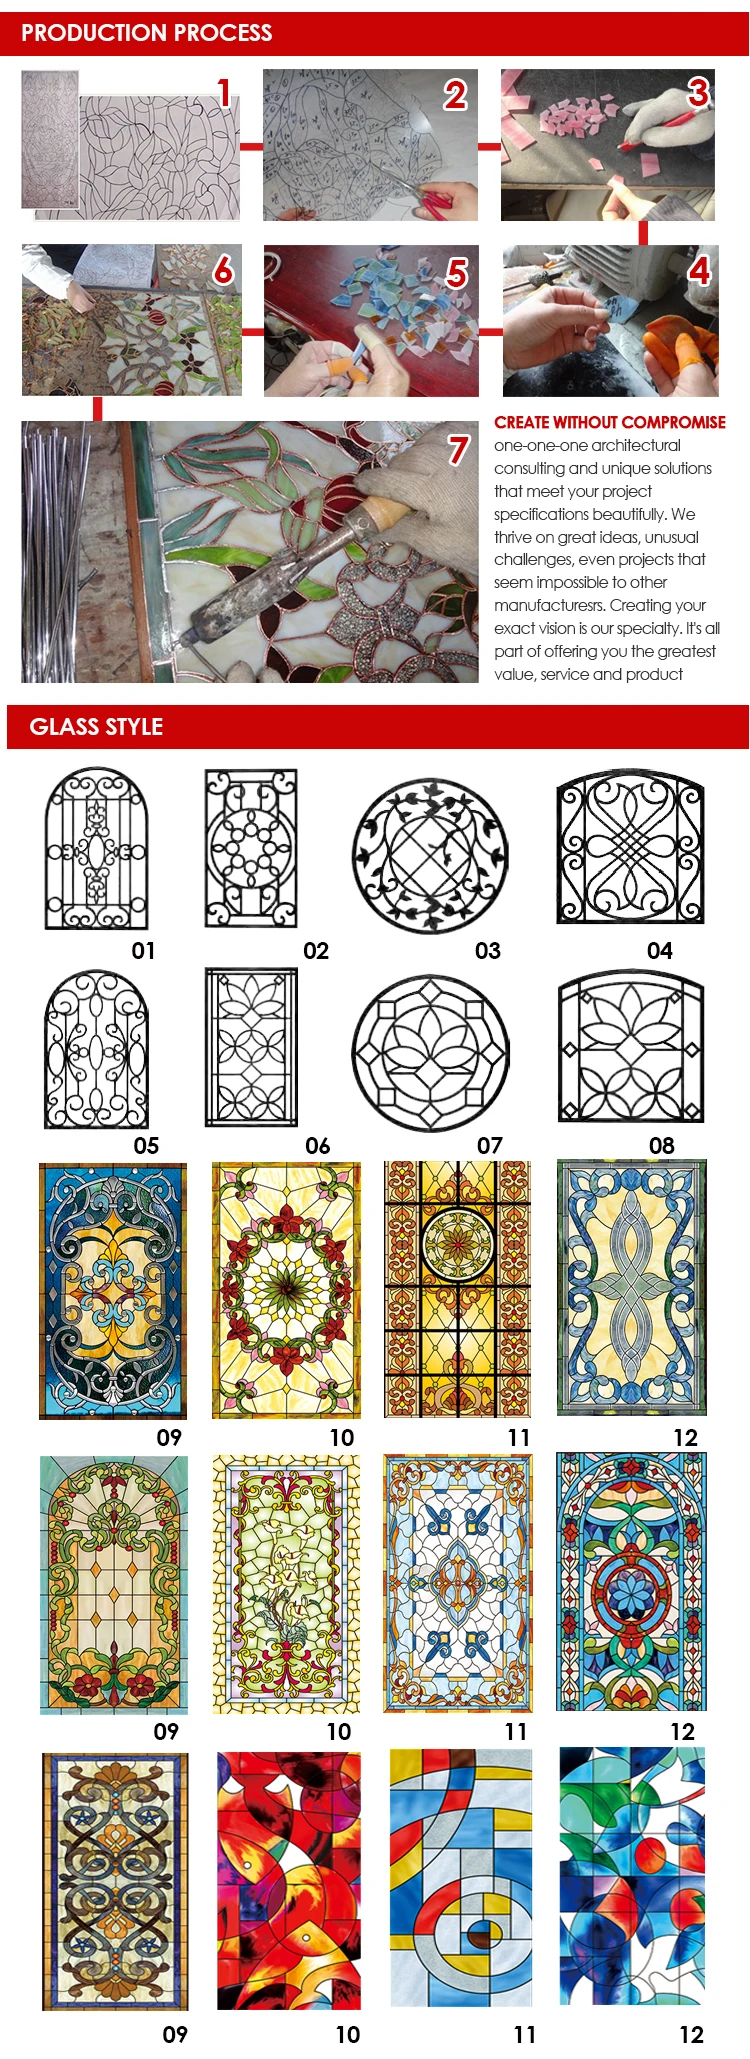 New York coloured glass window antique colored glass window panes and windows